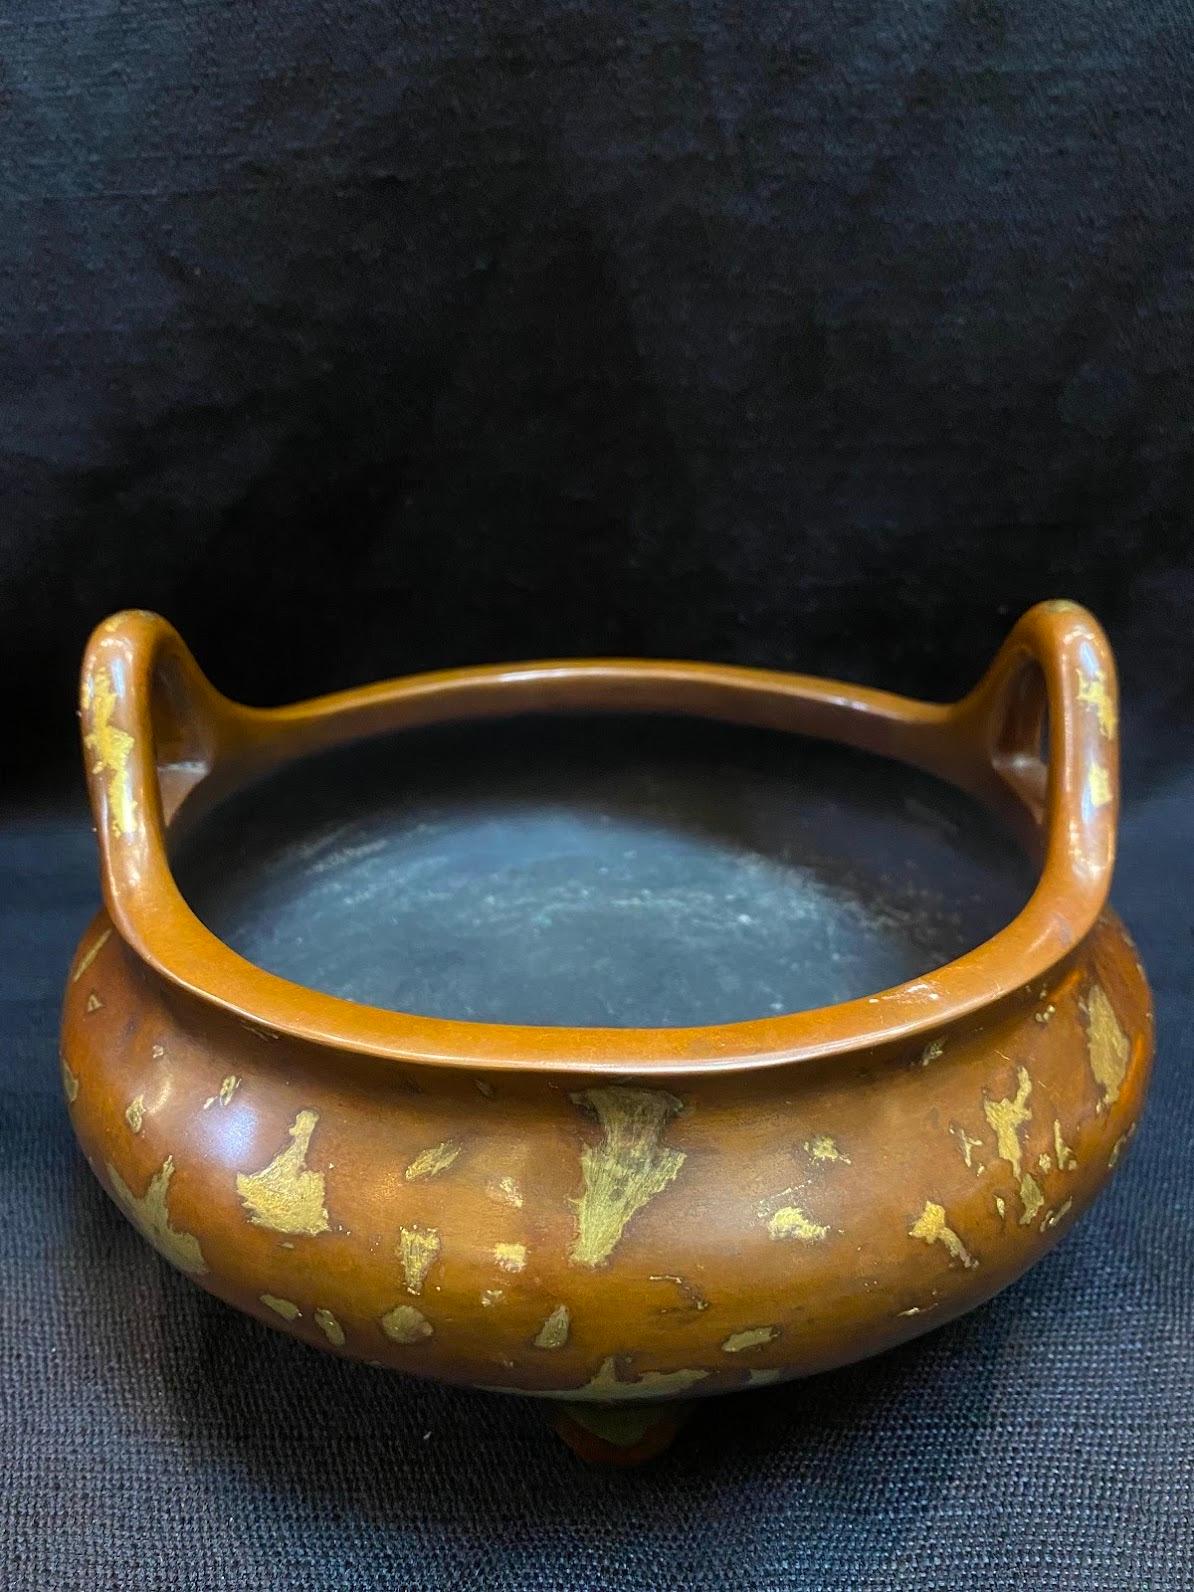 20th century antique gilt-splash bronze censer 20??????(??)
Condition: Shows normal sign of wear and use, No damage or crack. 
Material: gilt-splash bronze
Approximate size:H: 4 inch,W:7.5 inch. Diameter :7.5 inch. Please refer the size and